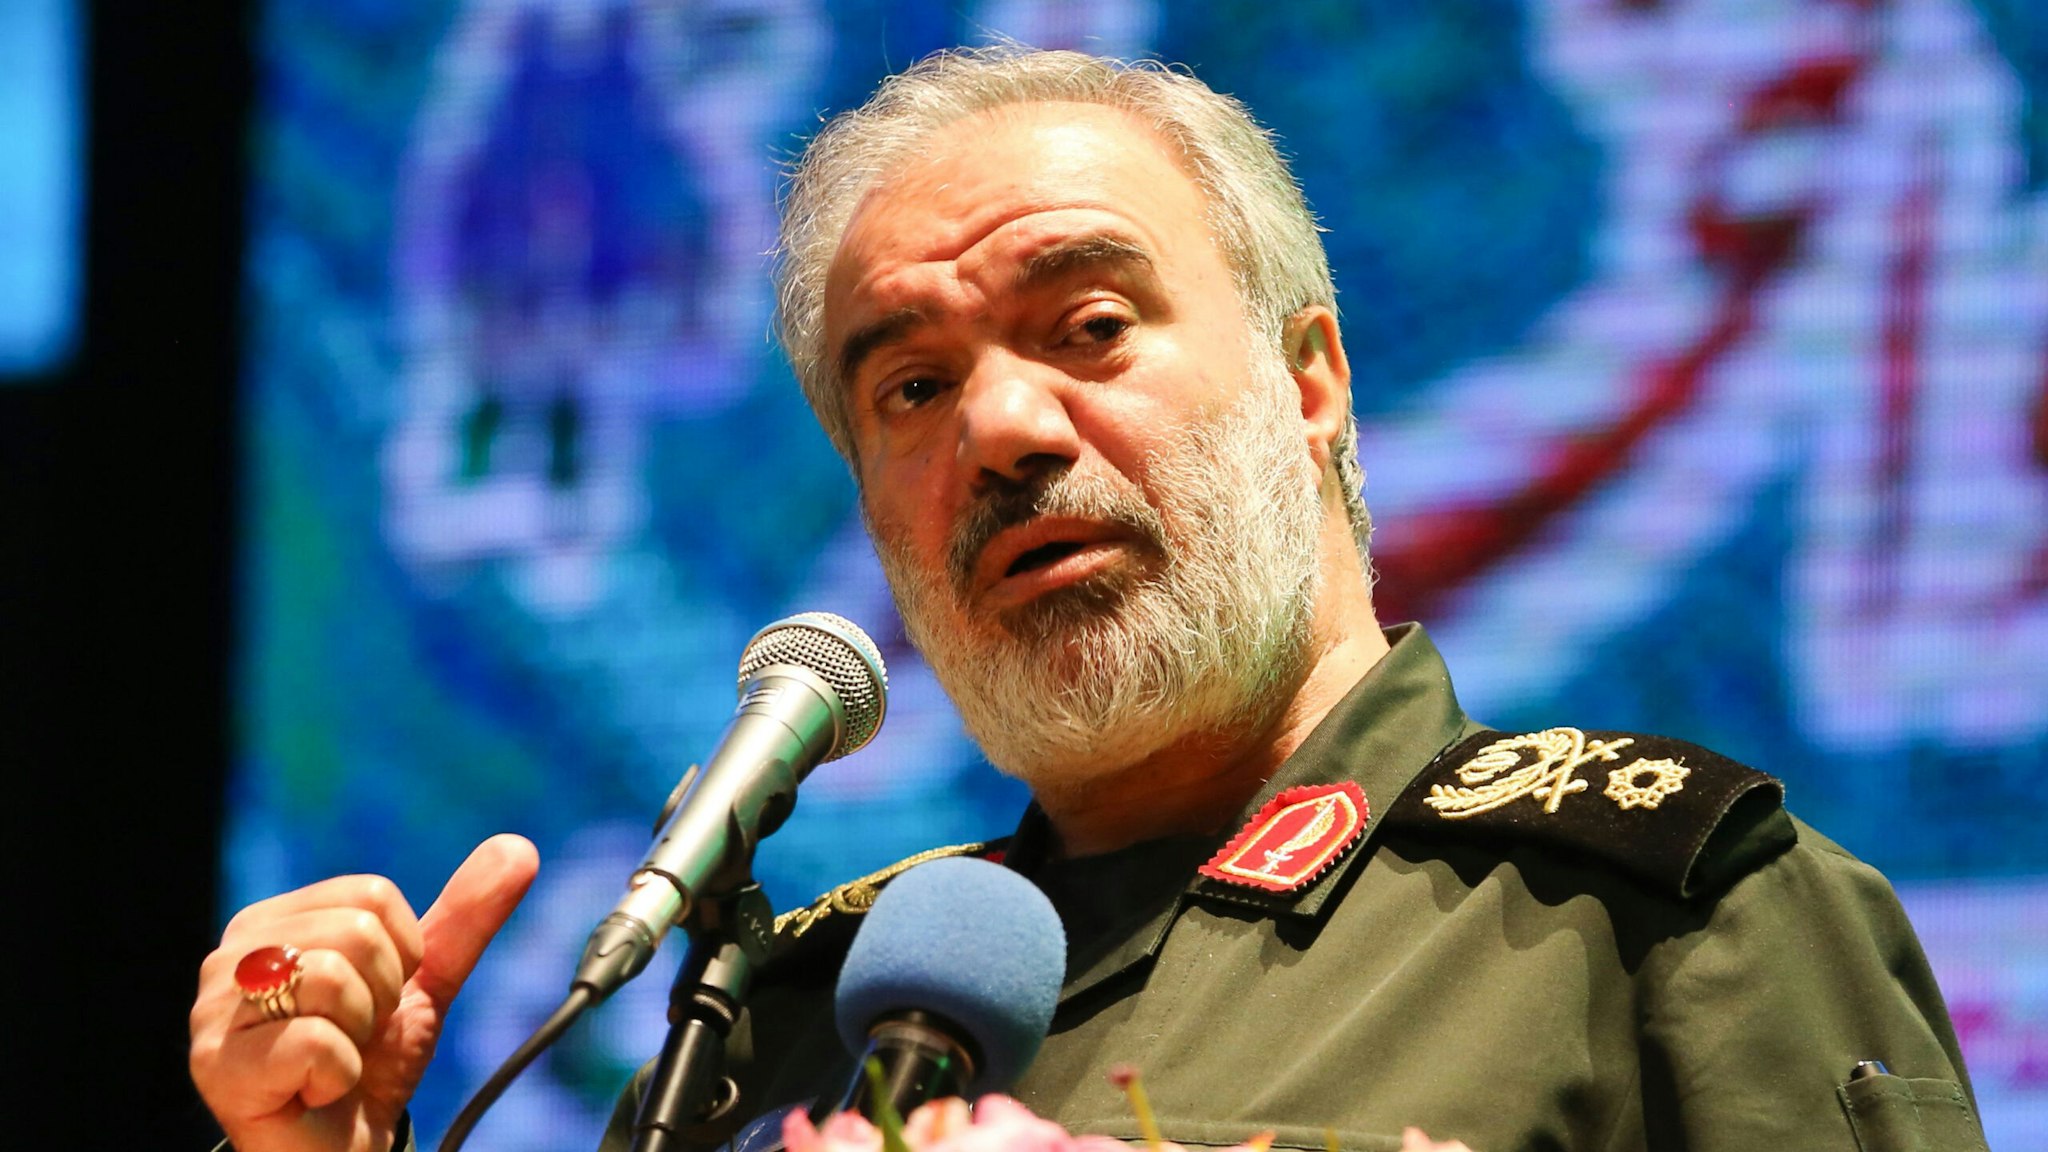 Ali Fadavi, Deputy Chief of the Islamic Revolution Guards Corps (IRGC), delivers a speech during Basij Week in the Iranian capital Tehran on November 24, 2019 . - Iran will severely punish "mercenaries" arrested over a wave of street violence that erupted after a sharp hike in fuel prices, a Revolutionary Guards commander warned. "We have arrested all stooges and mercenaries who have explicitly made confessions that they have been mercenaries of America, of Monafeghin and others," he told a news conference in Tehran.